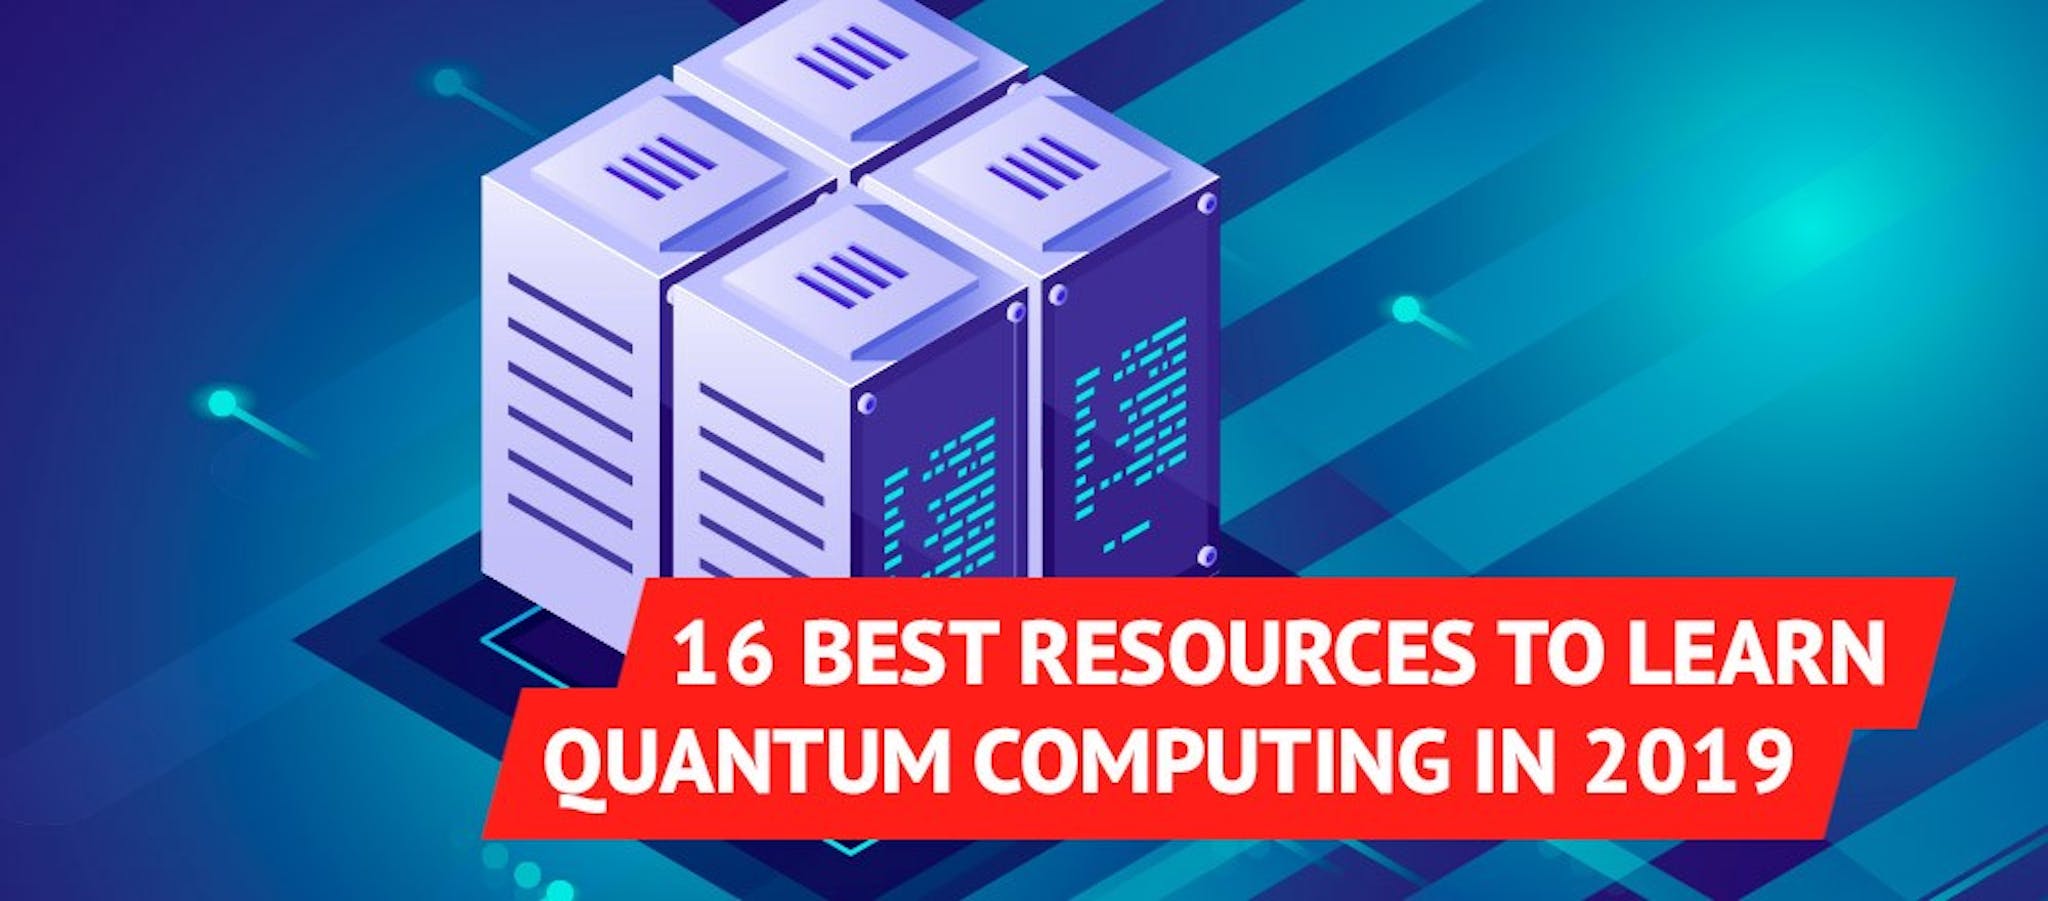 featured image - 16 Best Resources to Learn Quantum Computing in 2019